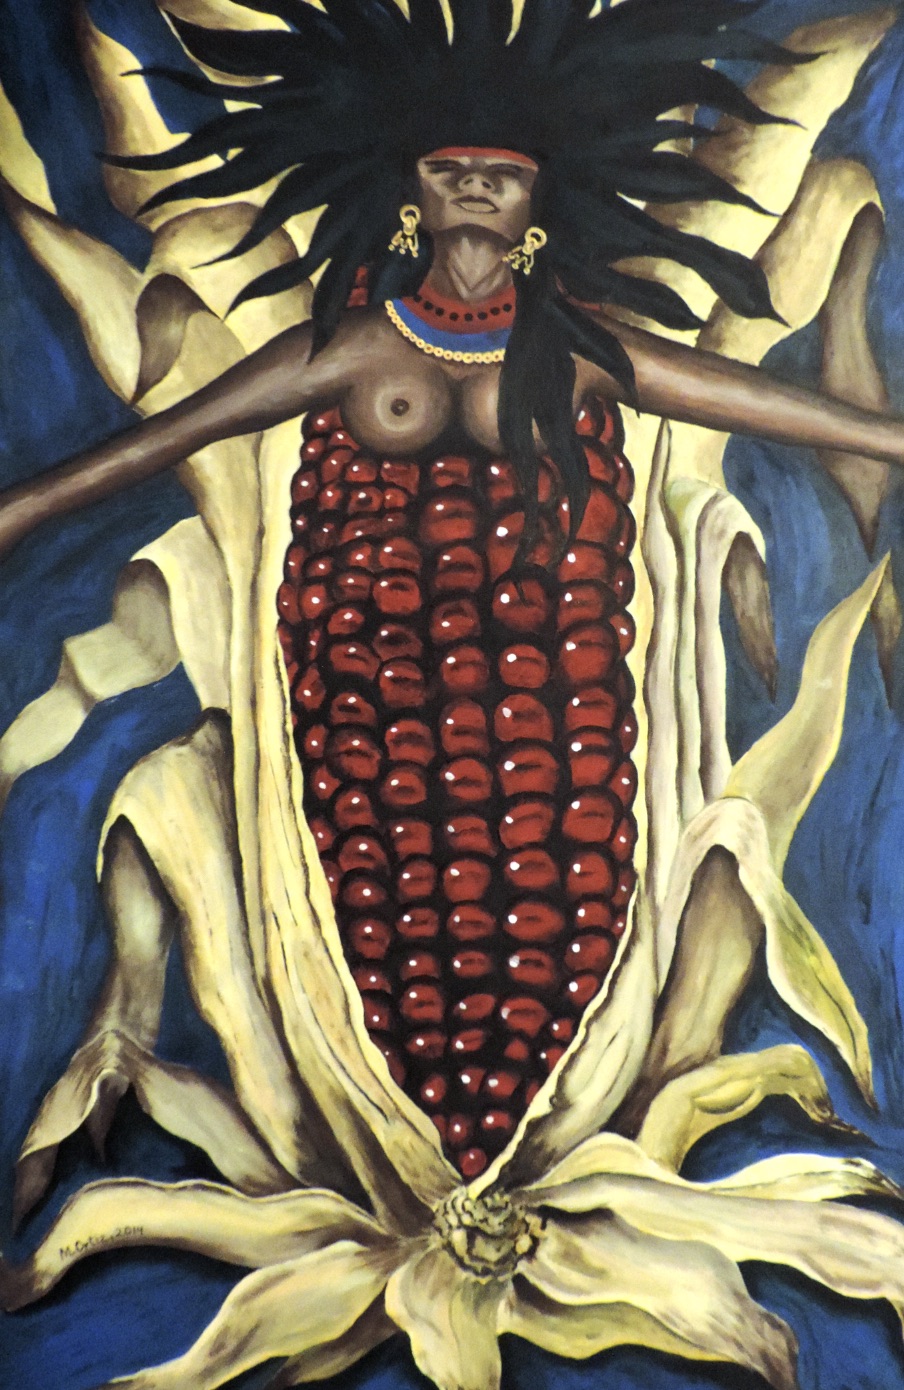 Corn and woman art, journal of wild culture, ©2020